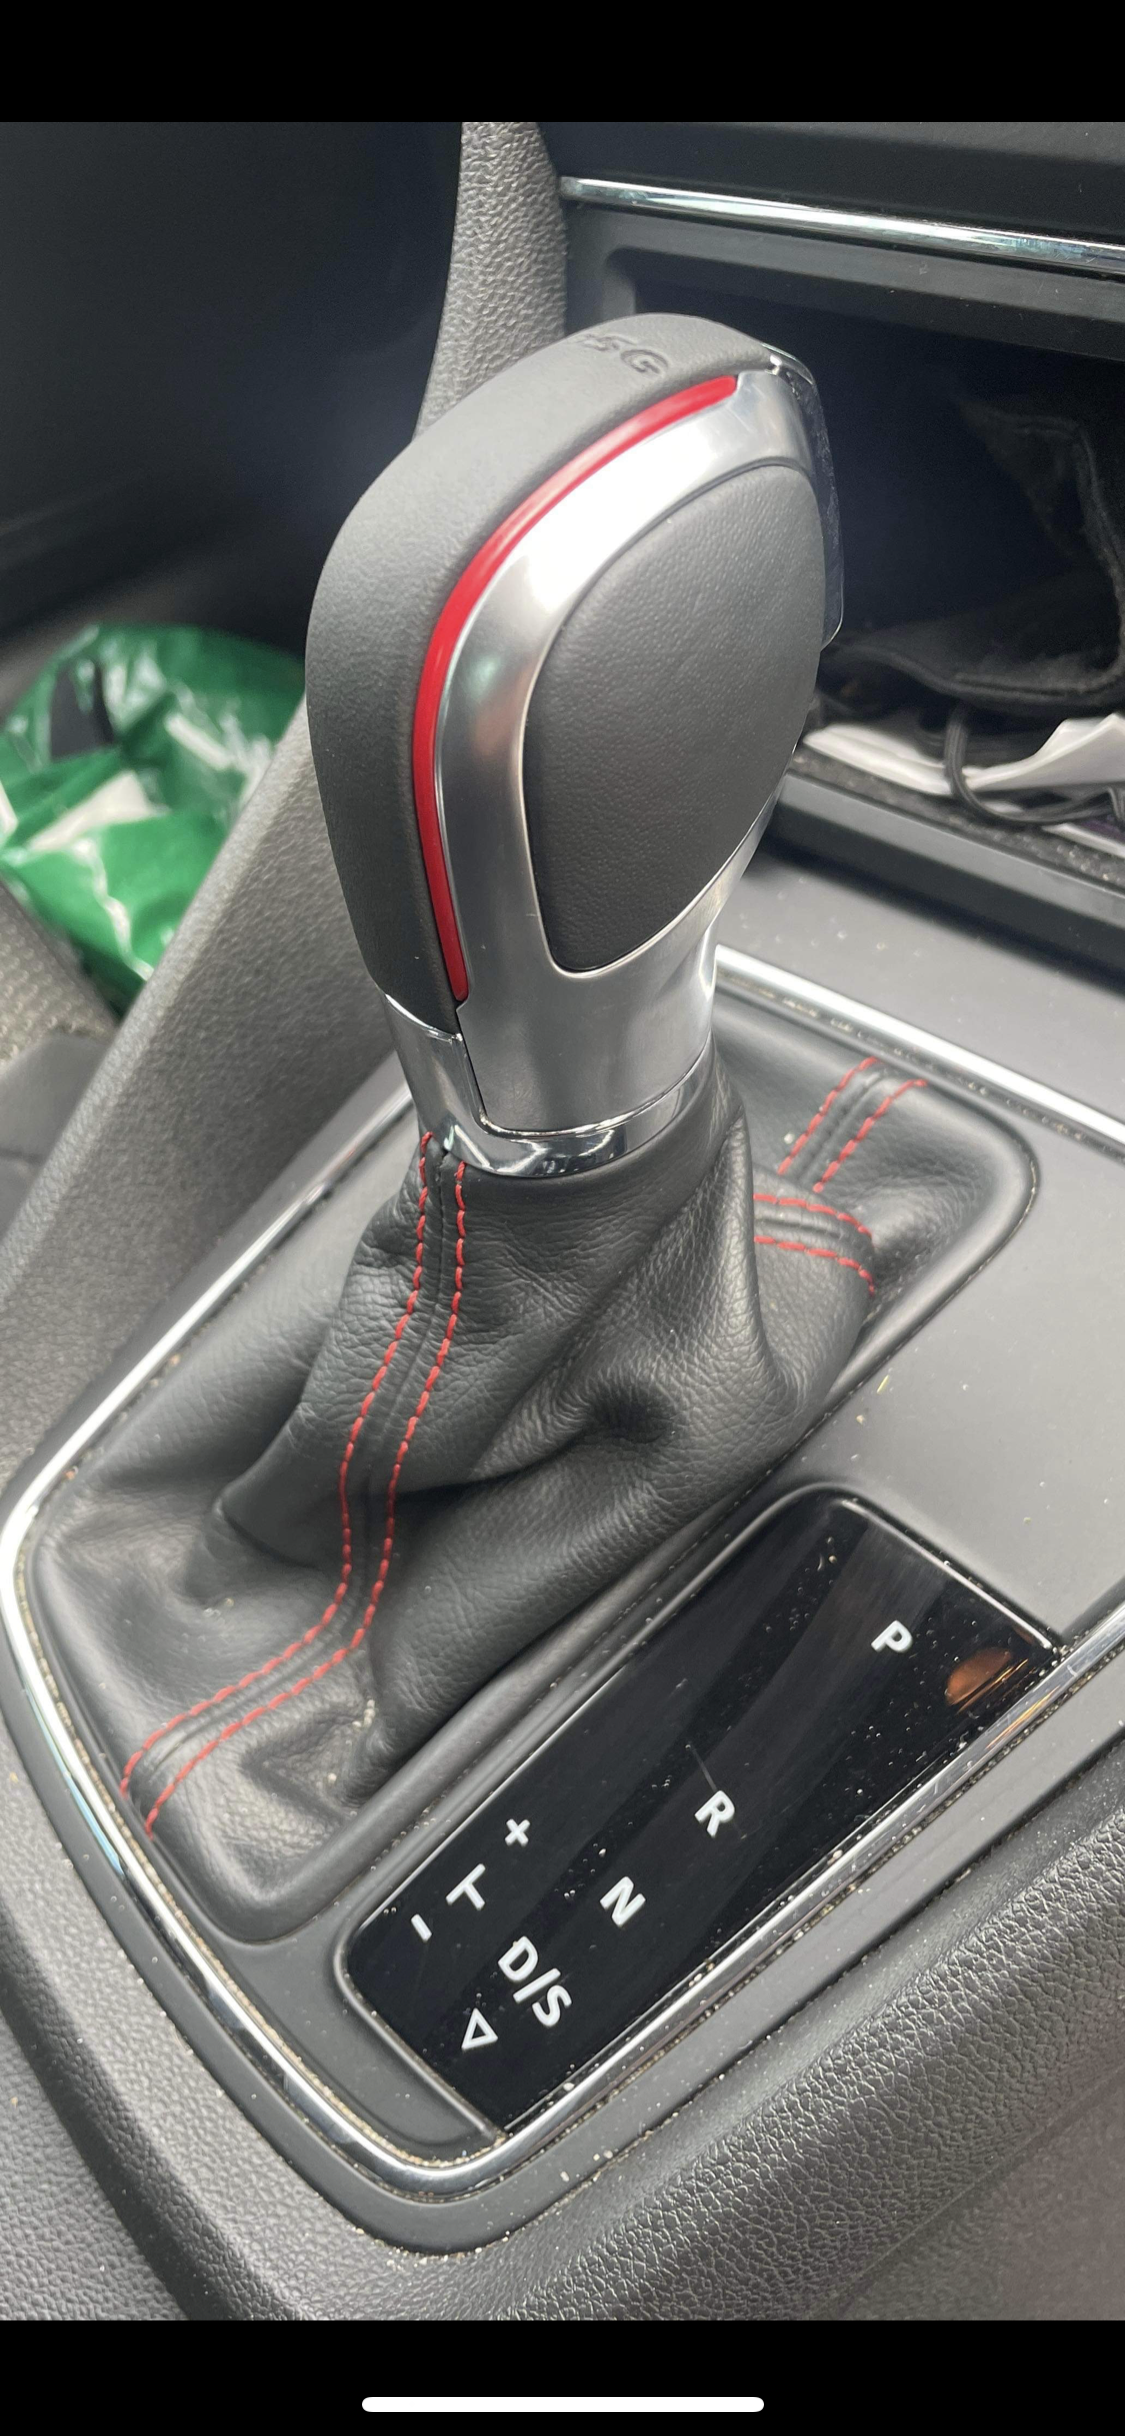 Automatic gear selector shifter with red accents